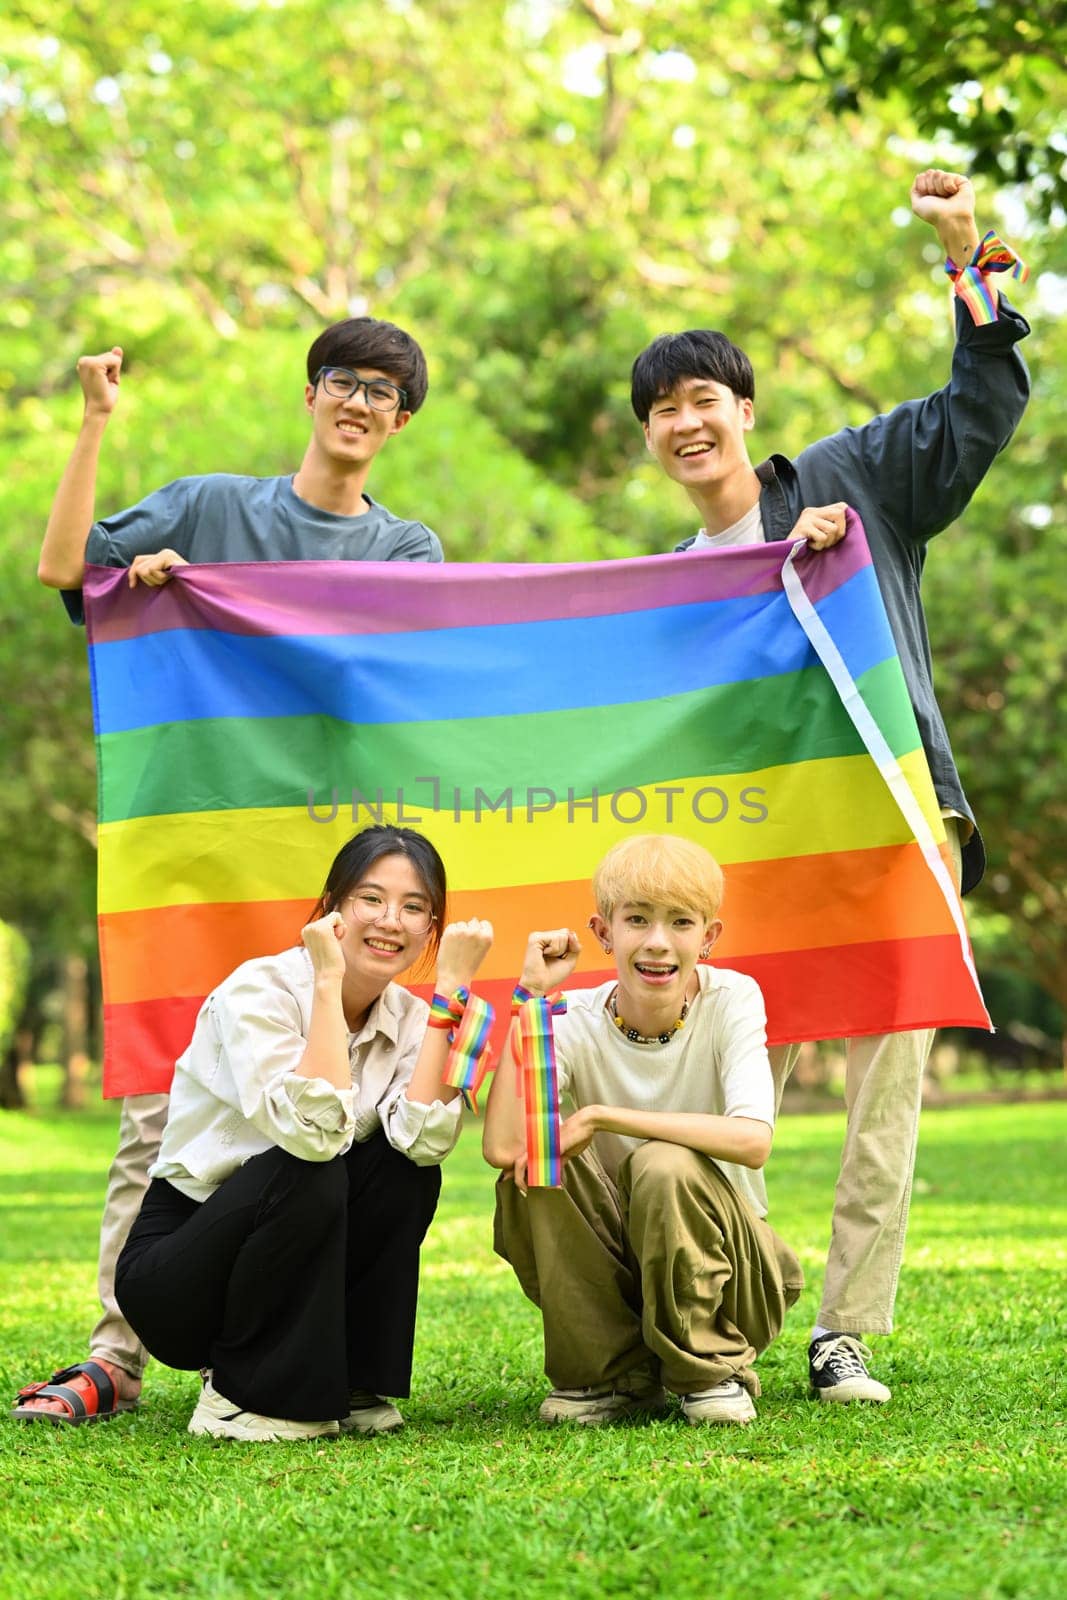 LGBTQ community, freedom, solidarity and equal rights. Image of young people with LGBTQ pride flag, standing in public park by prathanchorruangsak